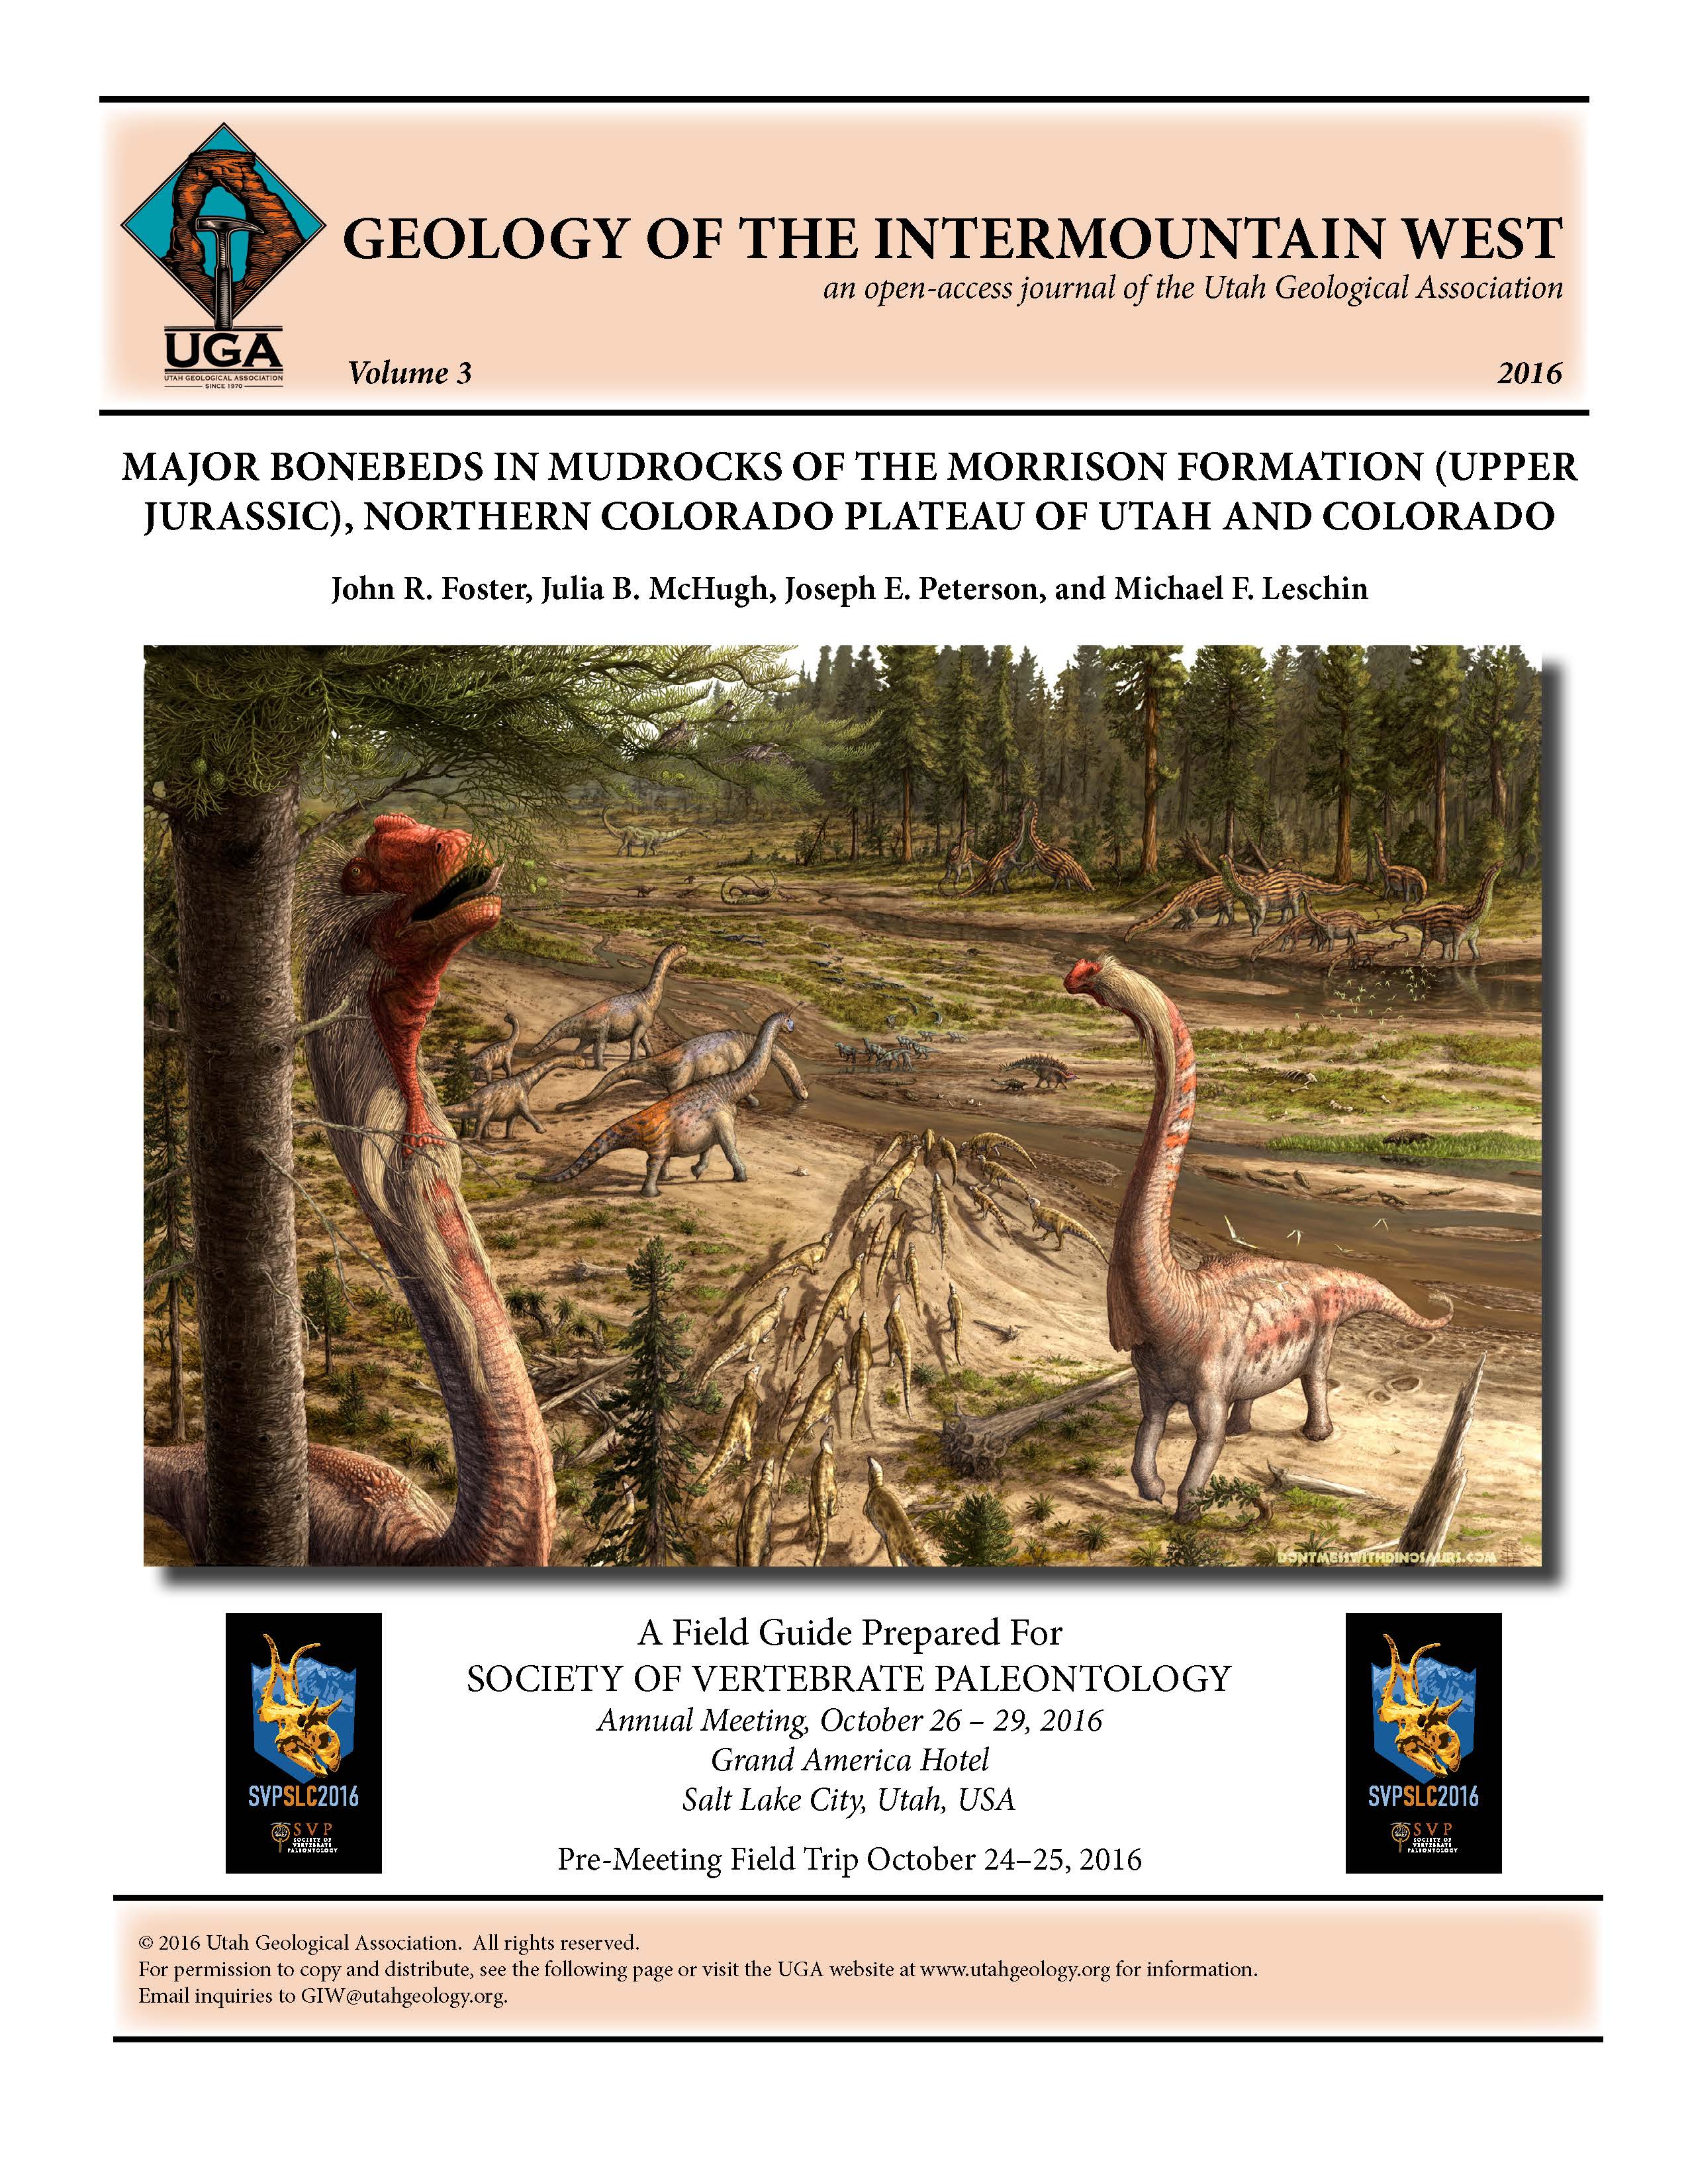 A Morrison Formation scene from 152 million years ago. Sauropods, theropods, stegosaurs, ankylosaurs, and crocodyliforms feed, rest, or stroll near a small river while pterosaurs fly low. Artwork by Brian Engh, dontmesswithdinosaurs.com.